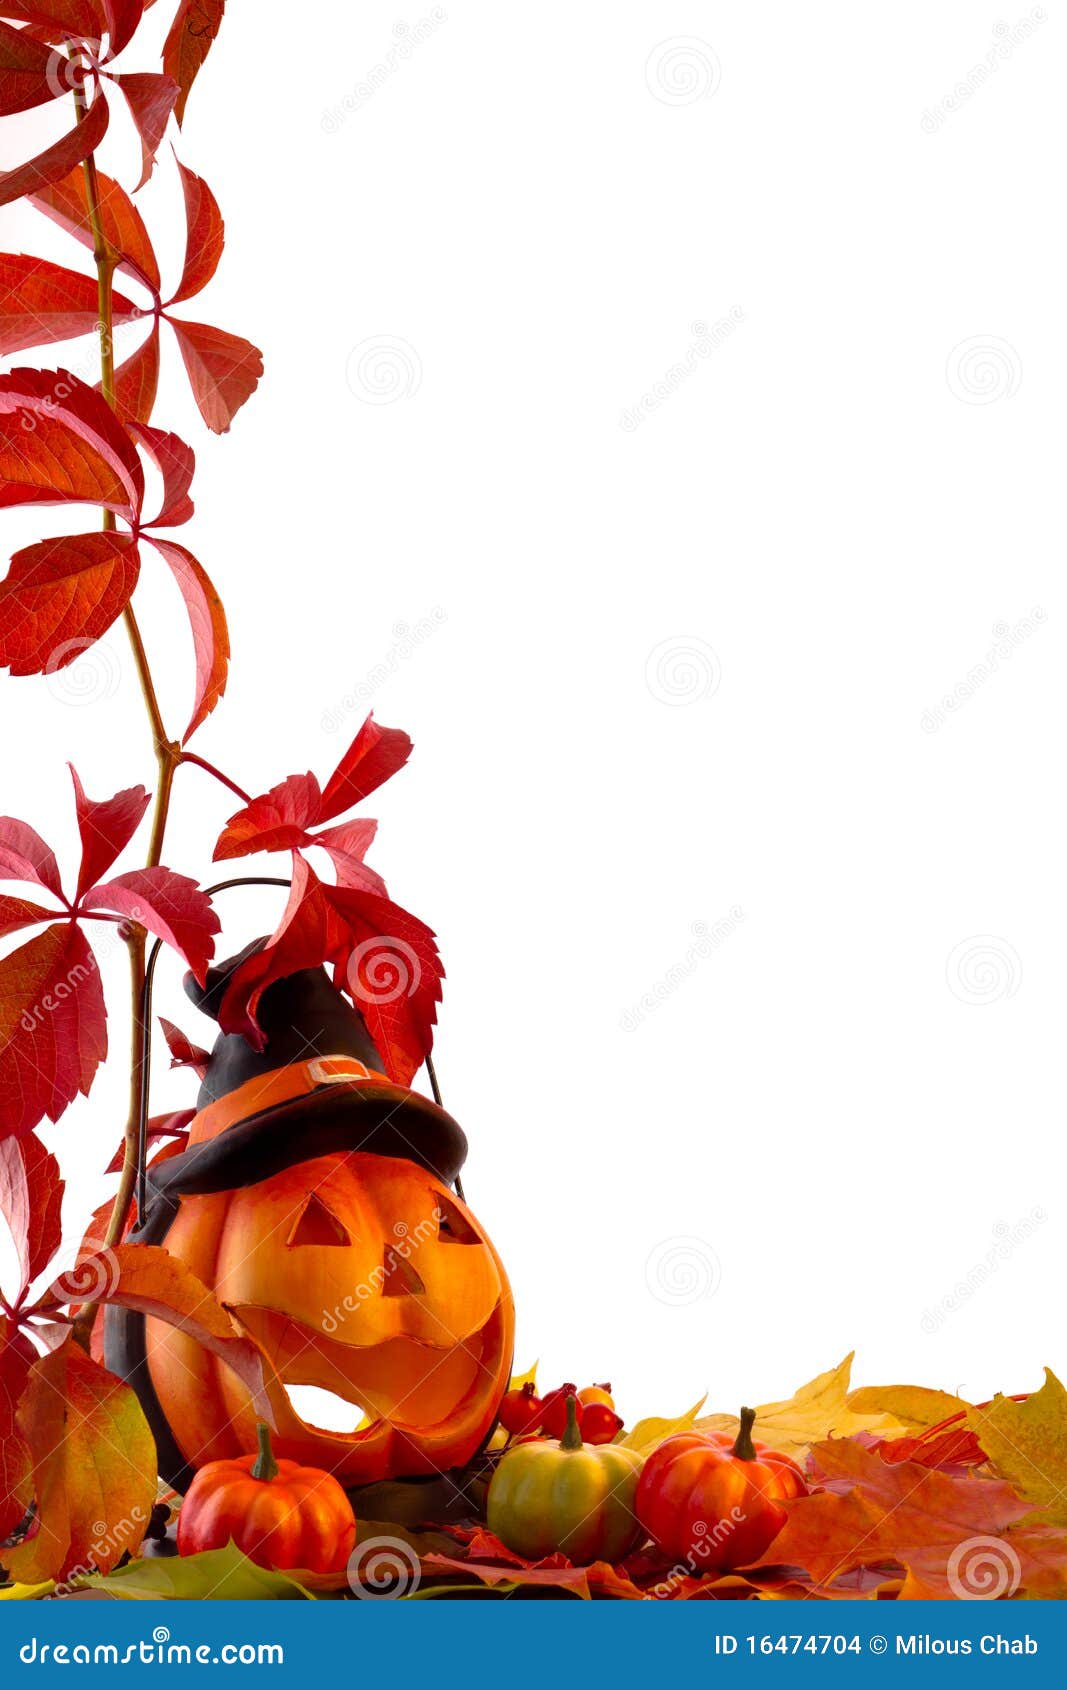 Pumpkins with fall leaves stock photo. Image of colourful - 16474704